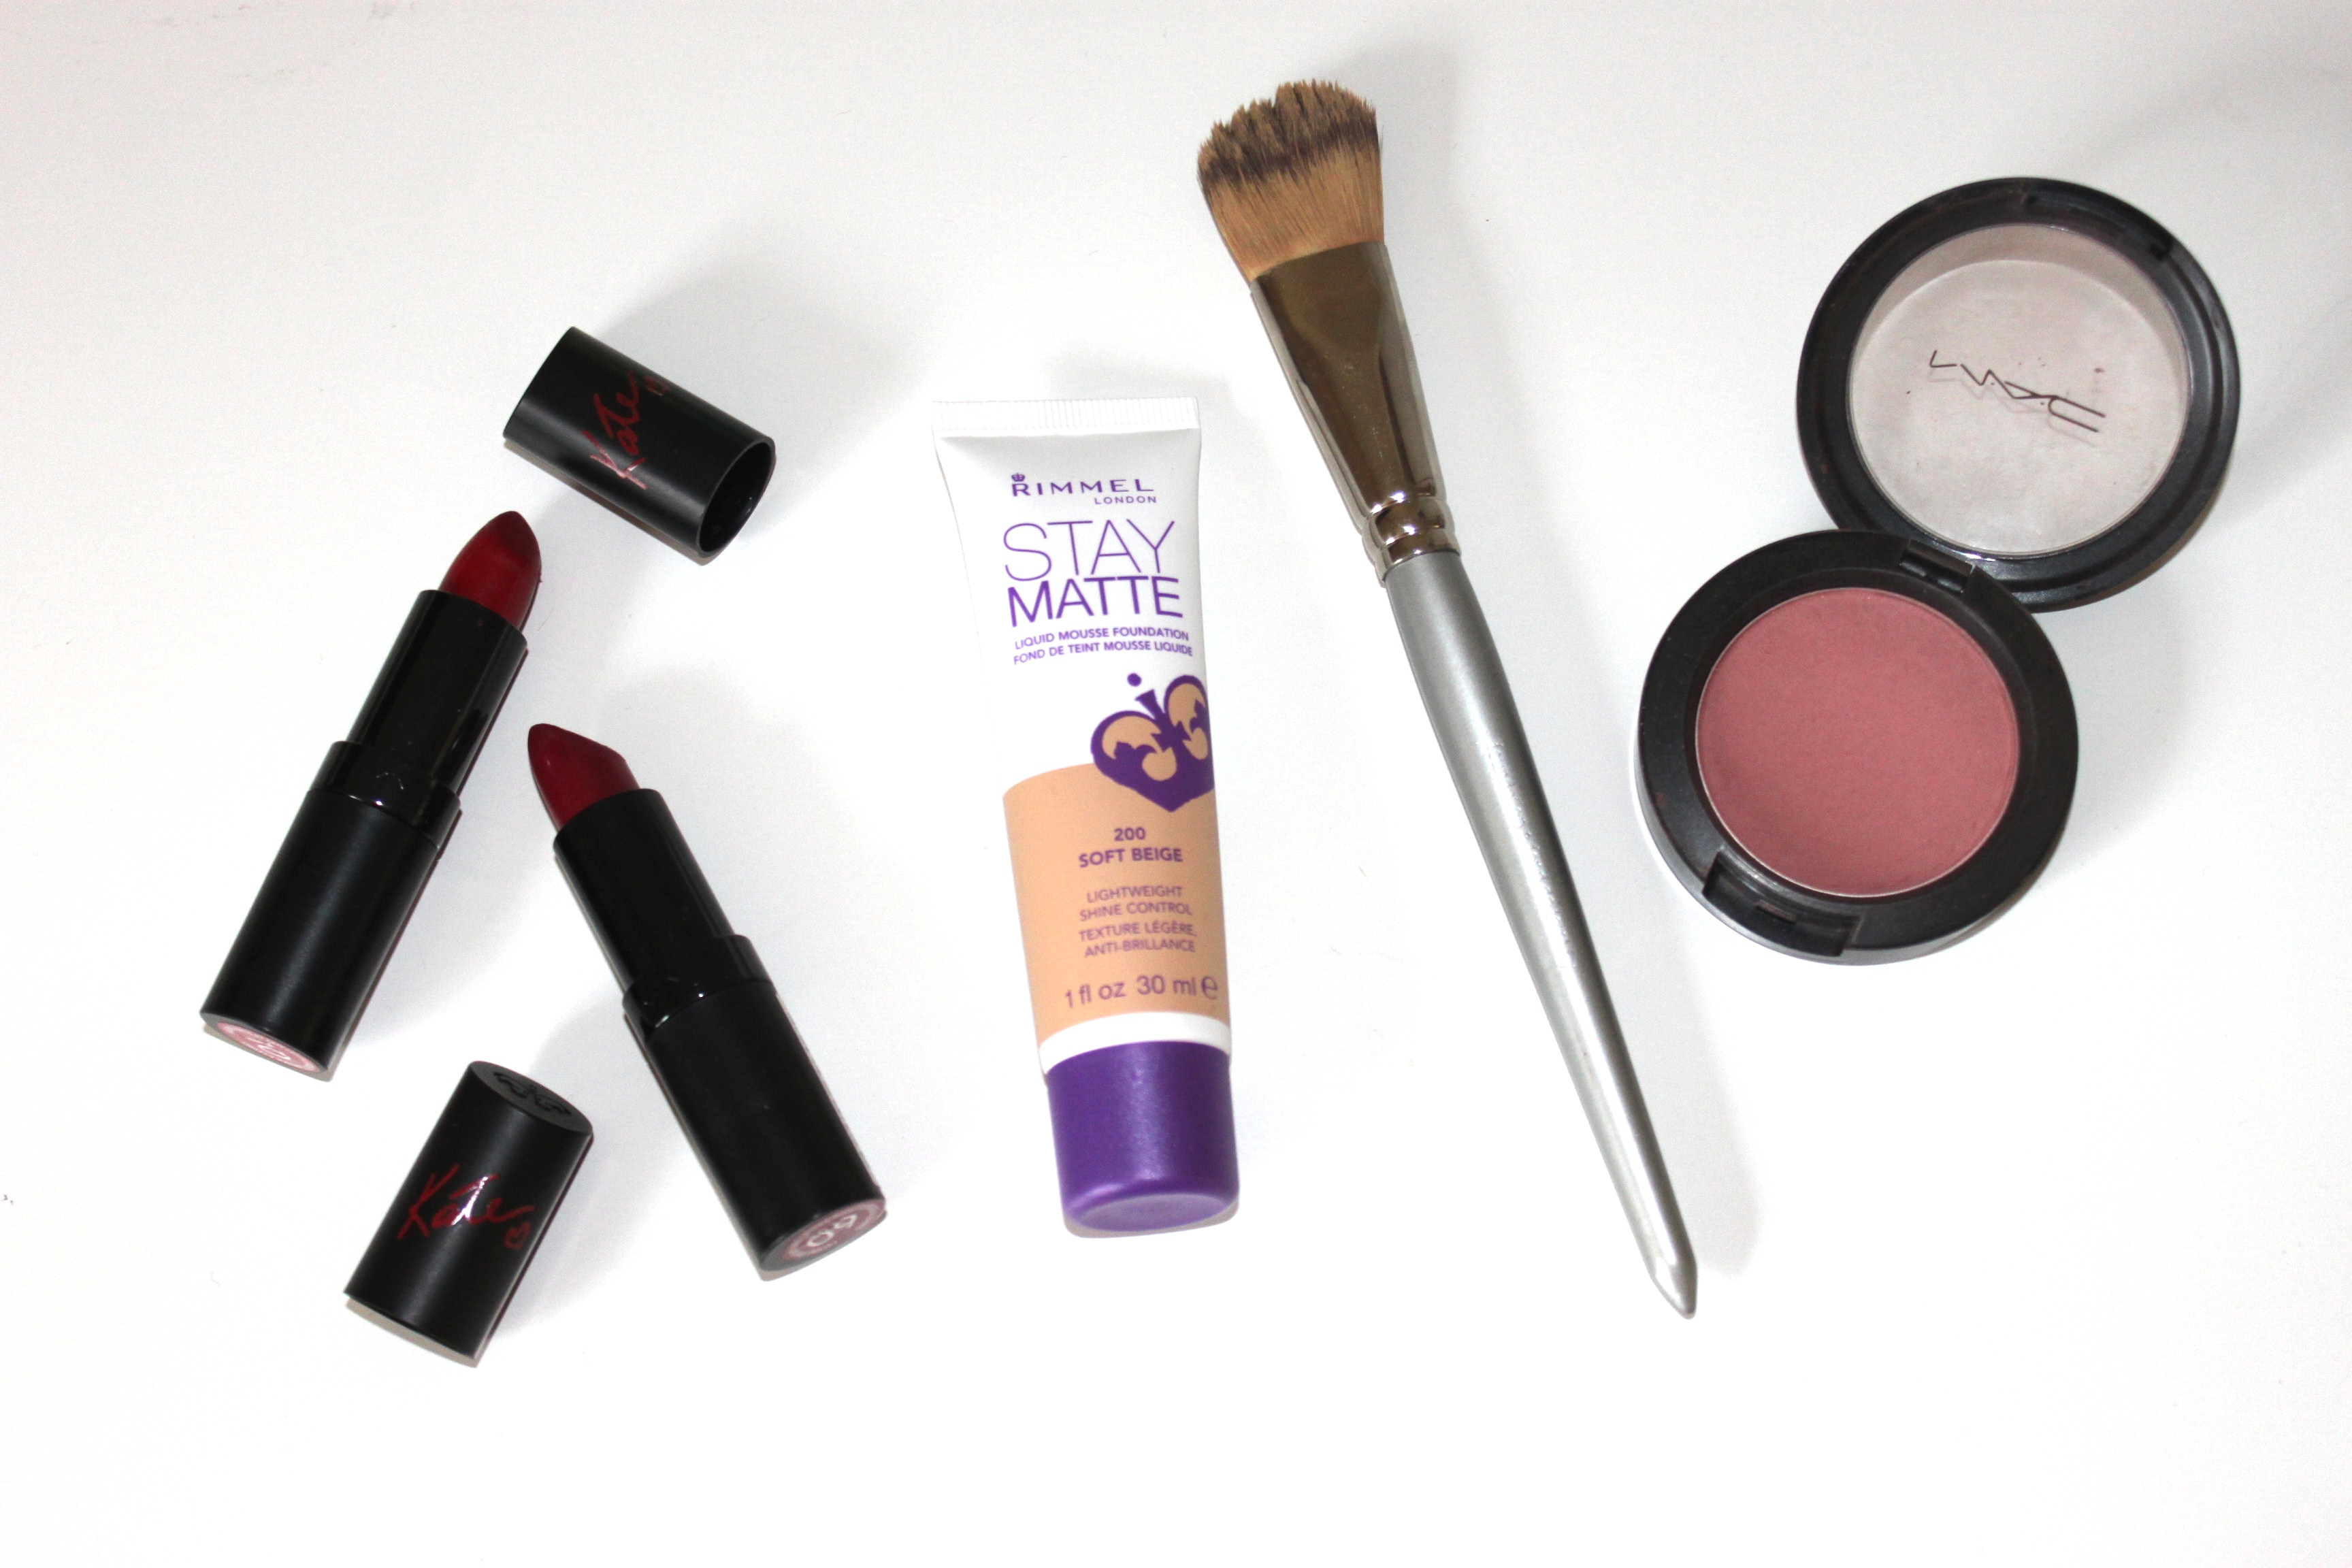 Oh So Glam: Rimmel Stay Matte